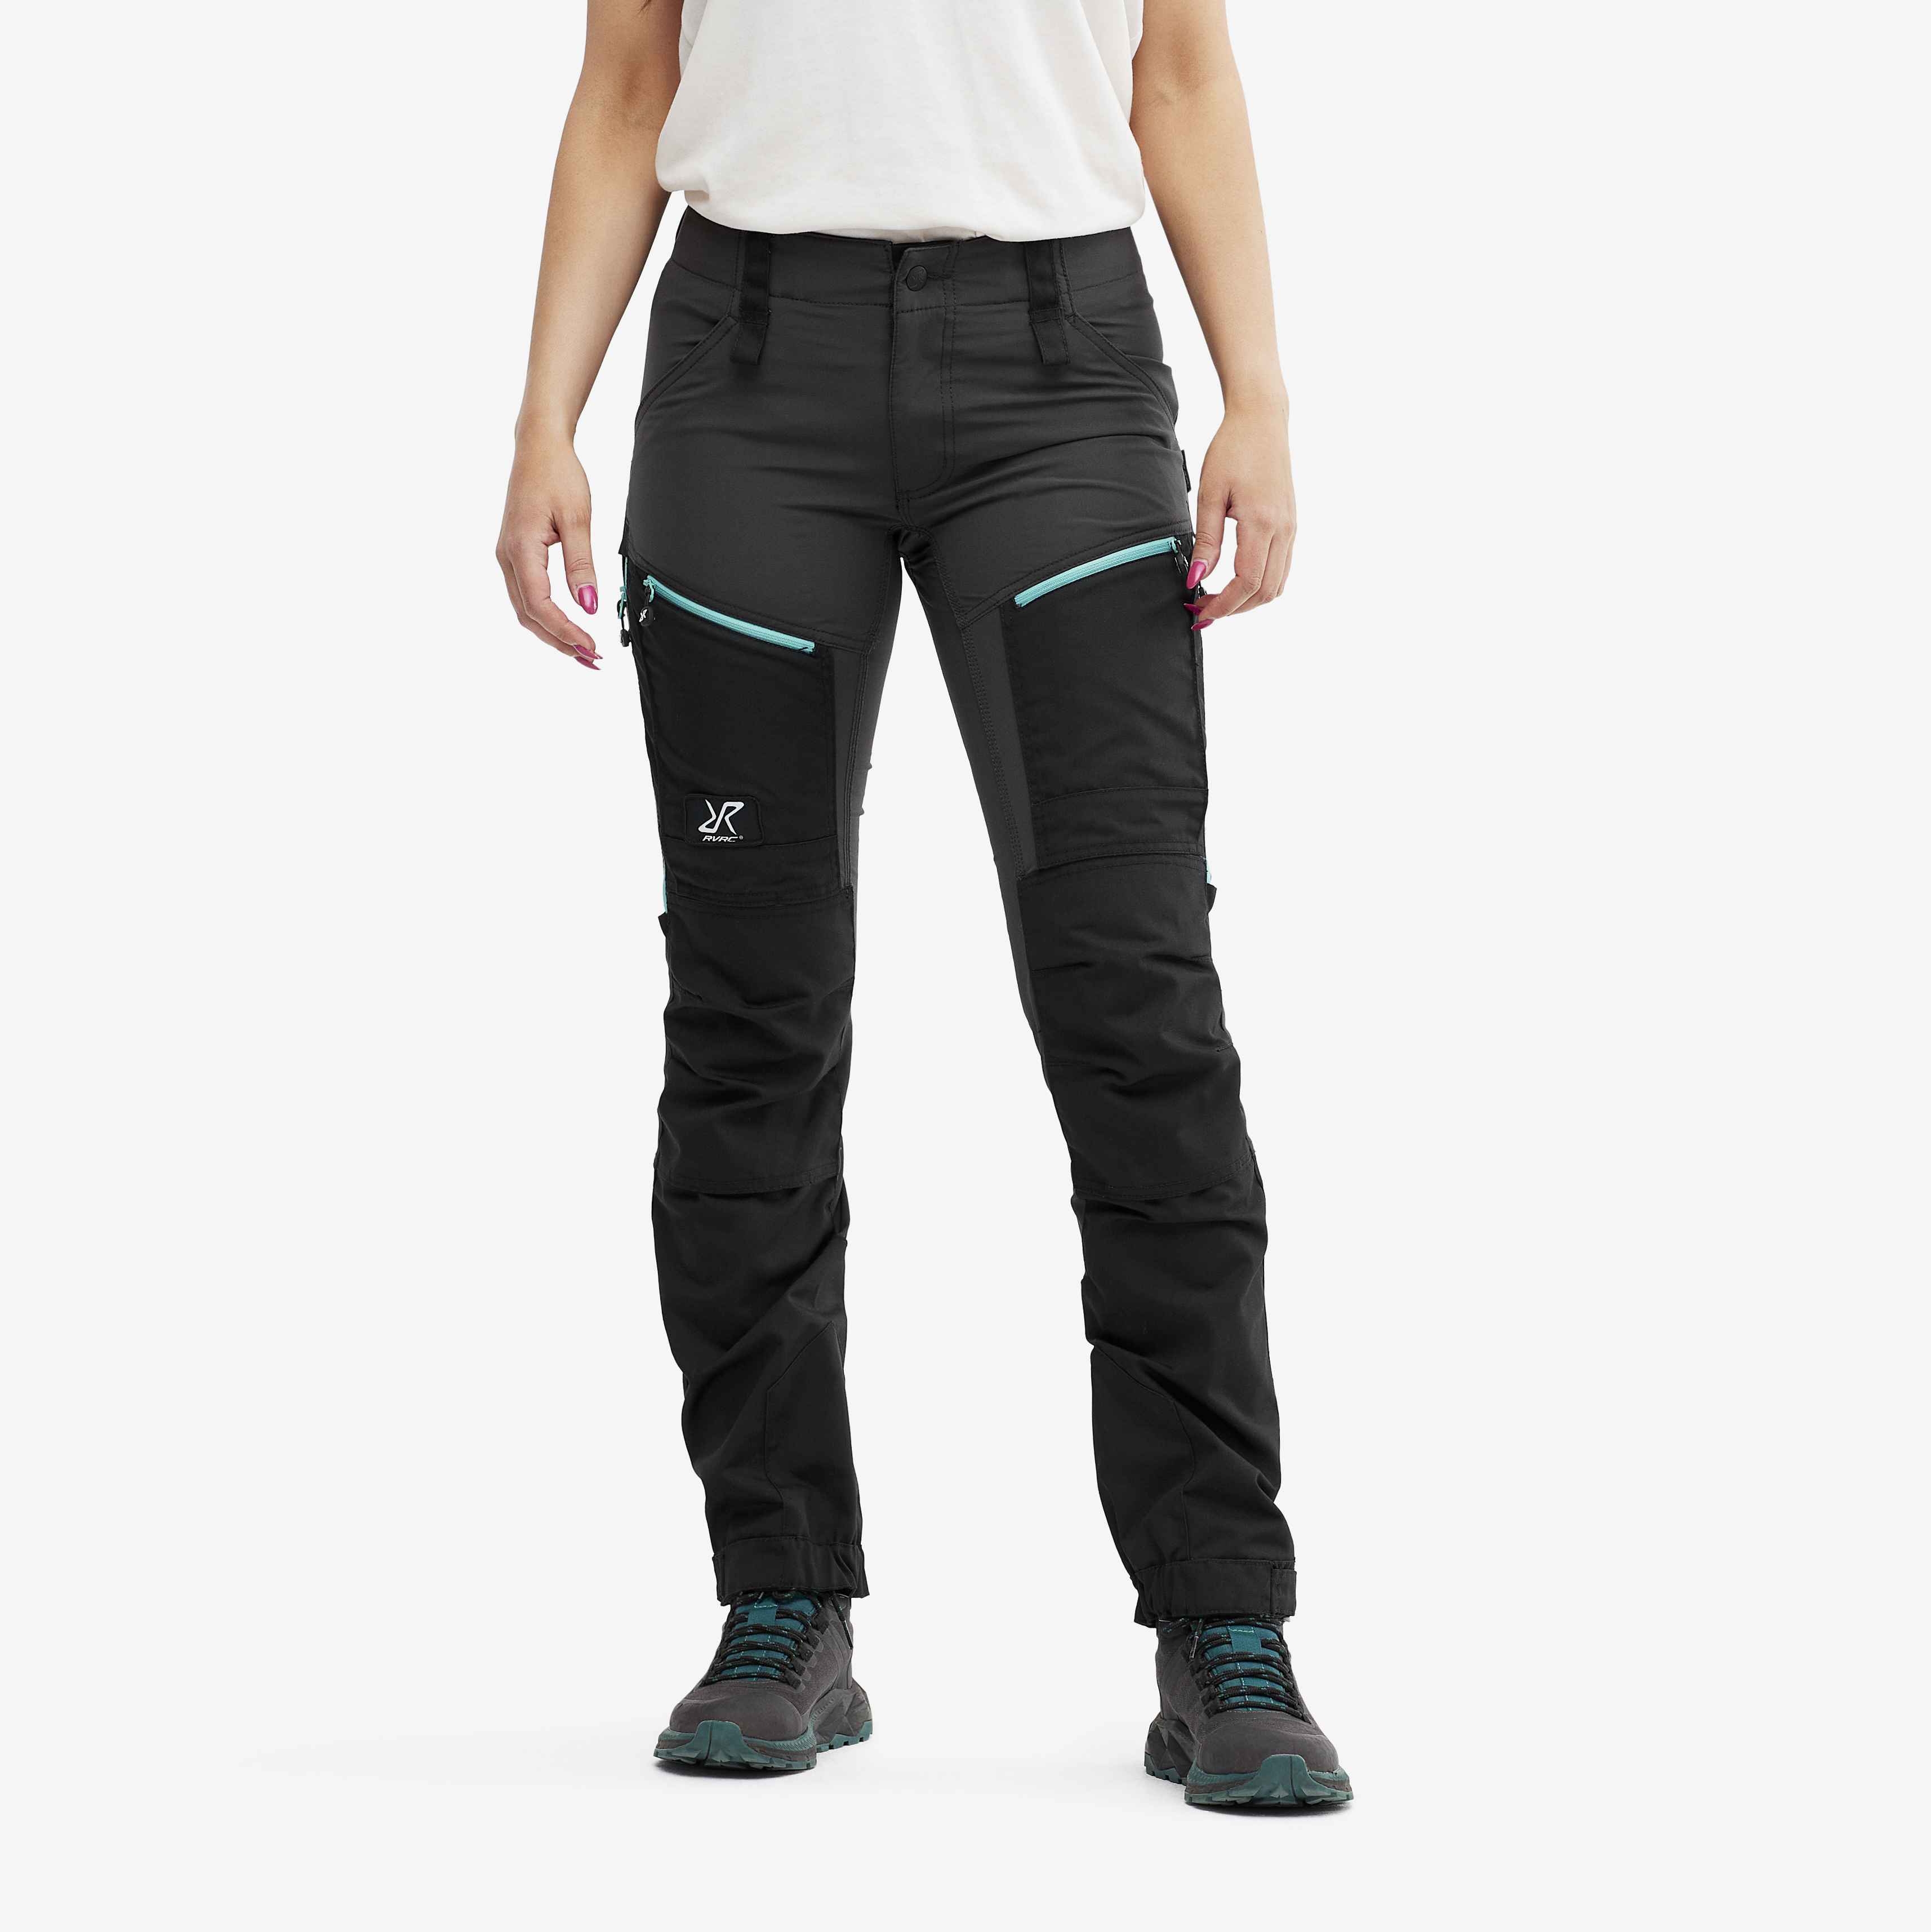 RevolutionRace - Have you tried our Hyper Pro Pants yet? They are